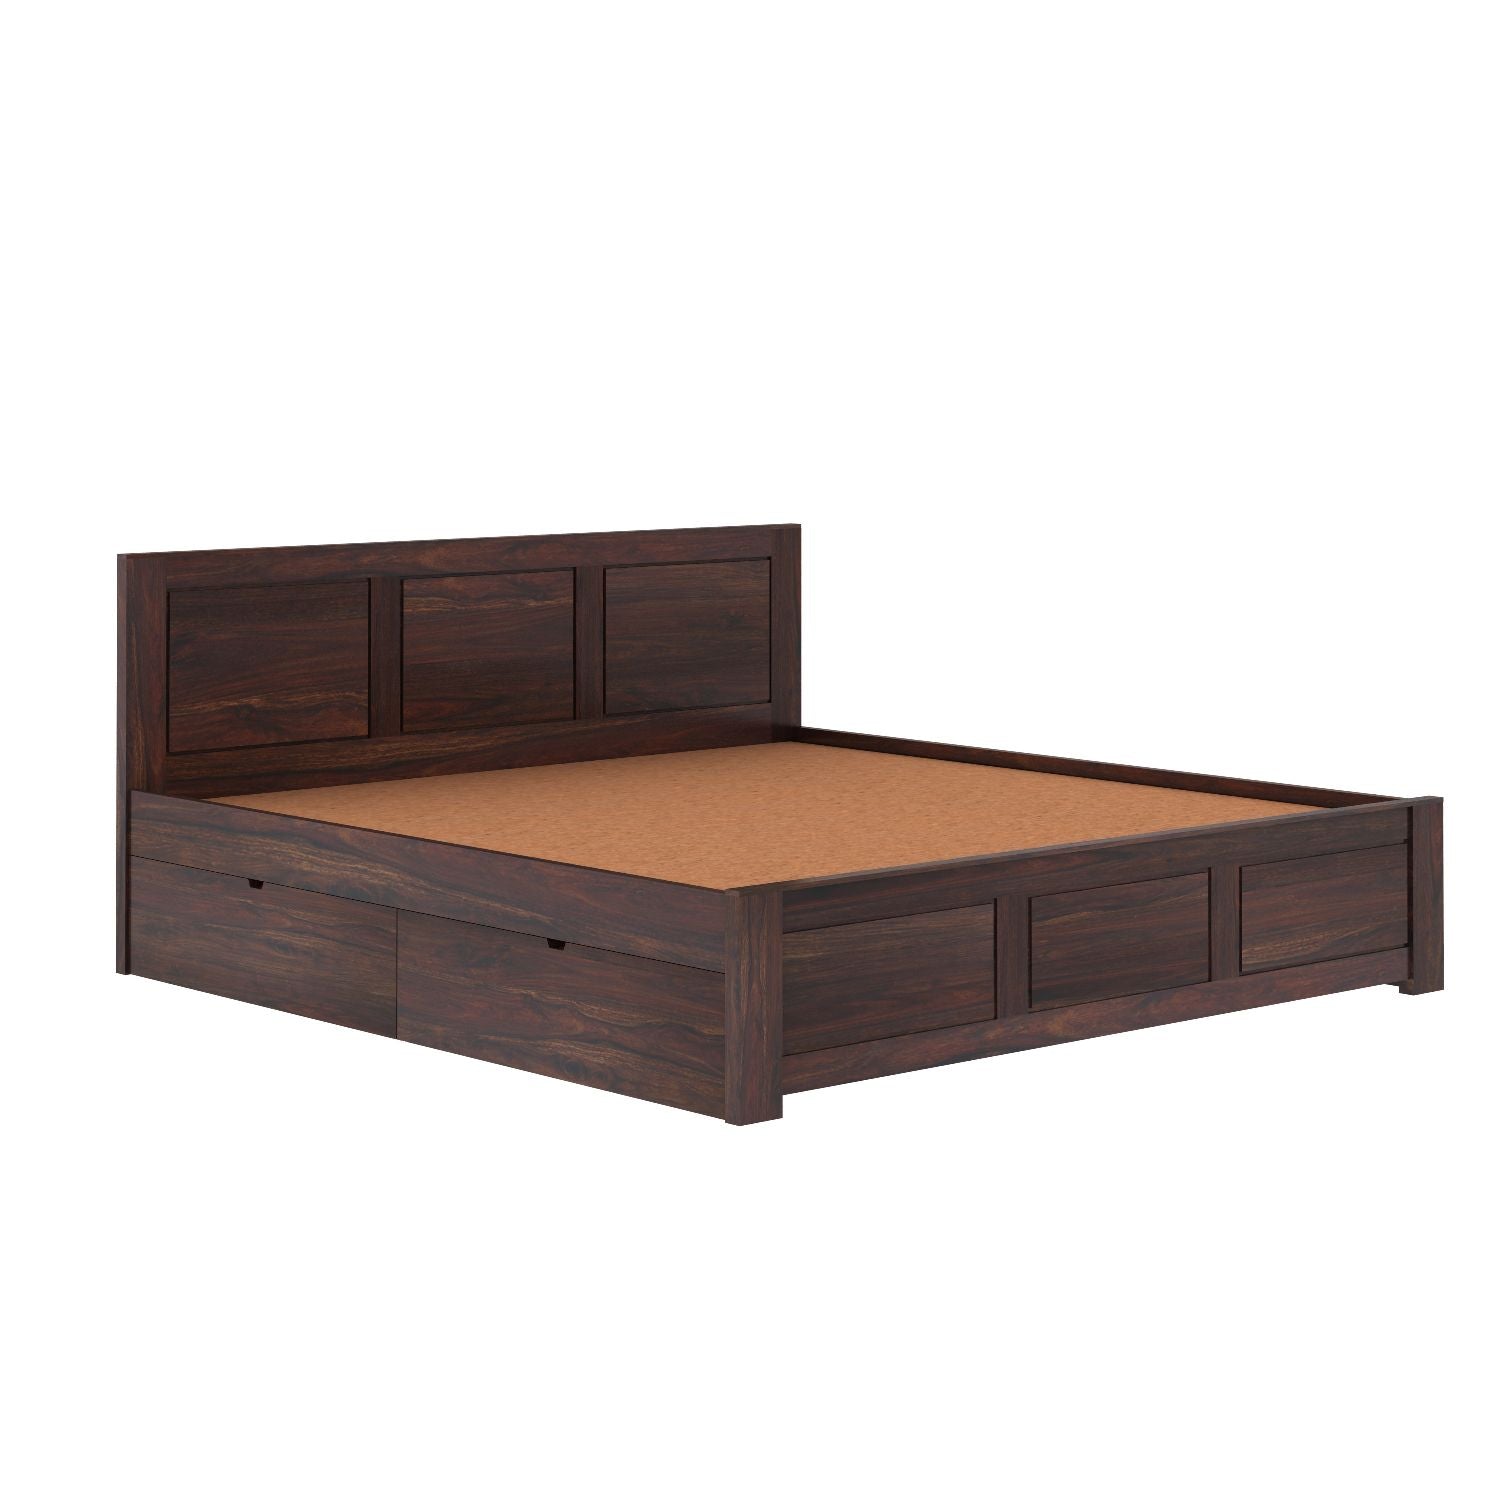 Woodwing Solid Sheesham Wood Bed With Four Drawers (King Size, Walnut Finish)